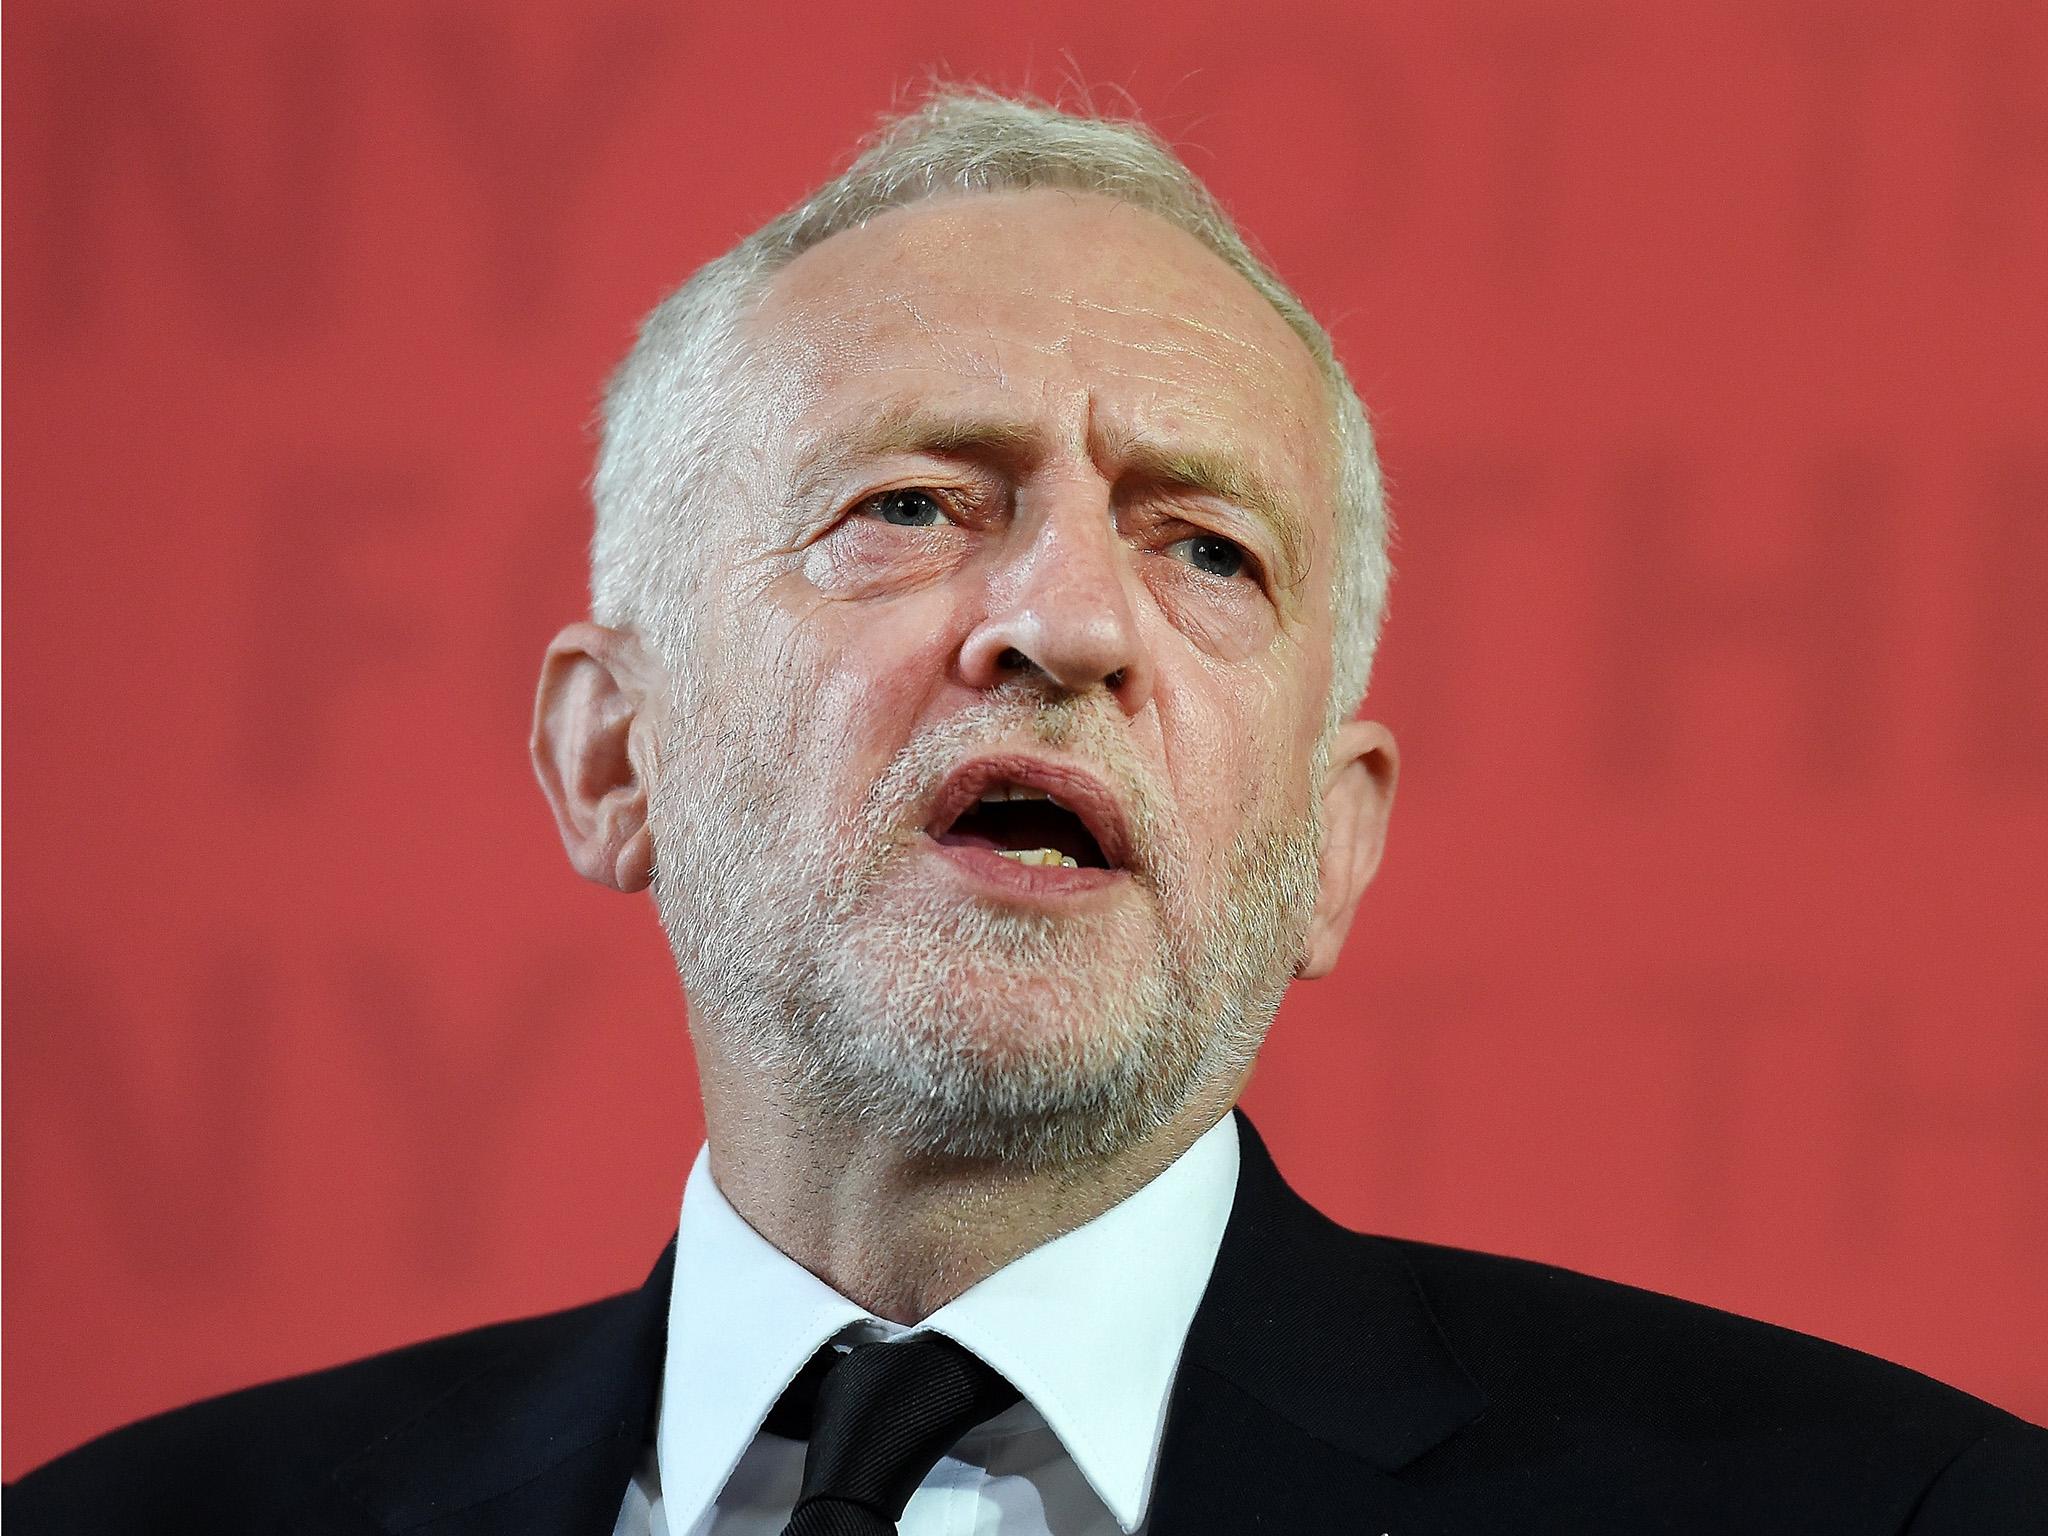 The Labour leader said that the war on terror has failed and that foreign policy would change under his party’s government